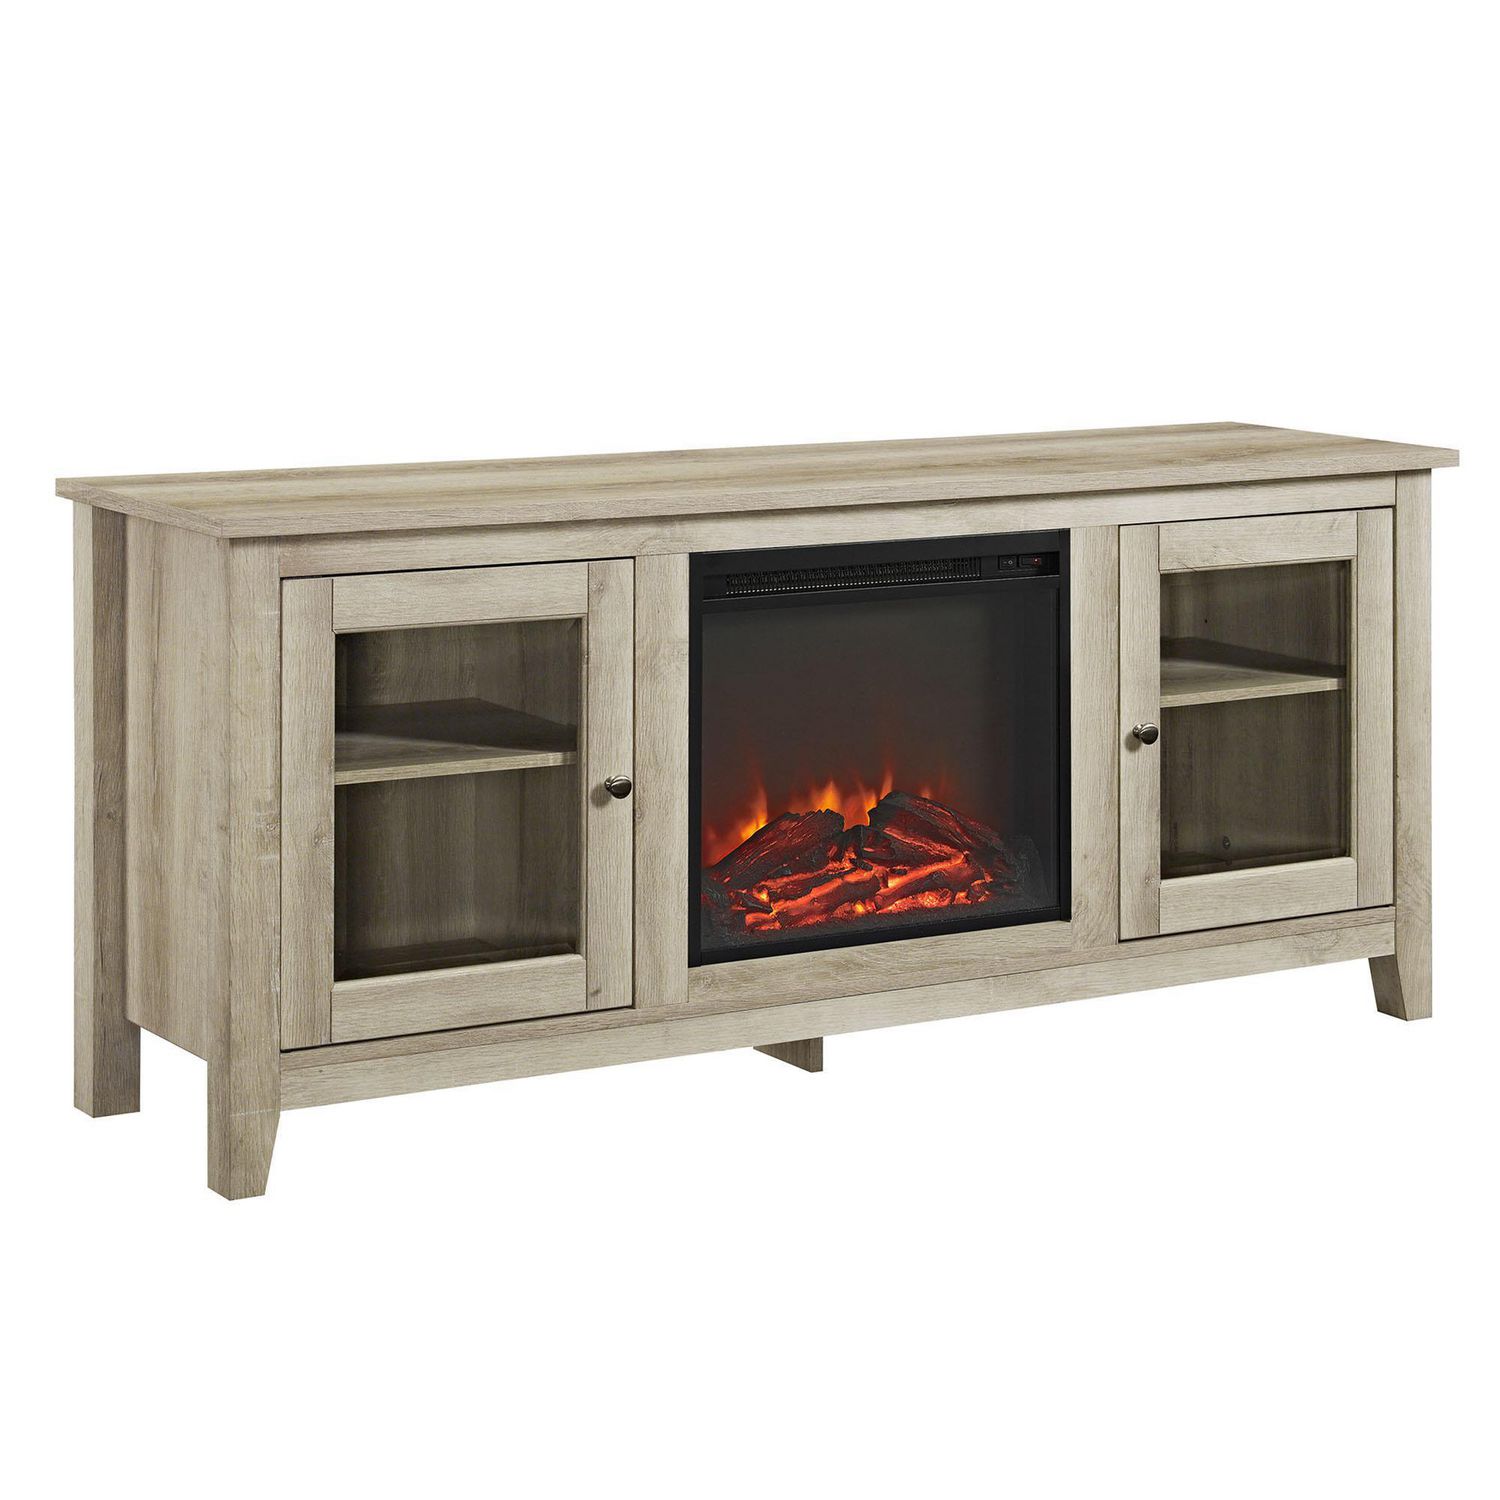 58" Wood White Oak Media TV Stand Console with Fireplace ...